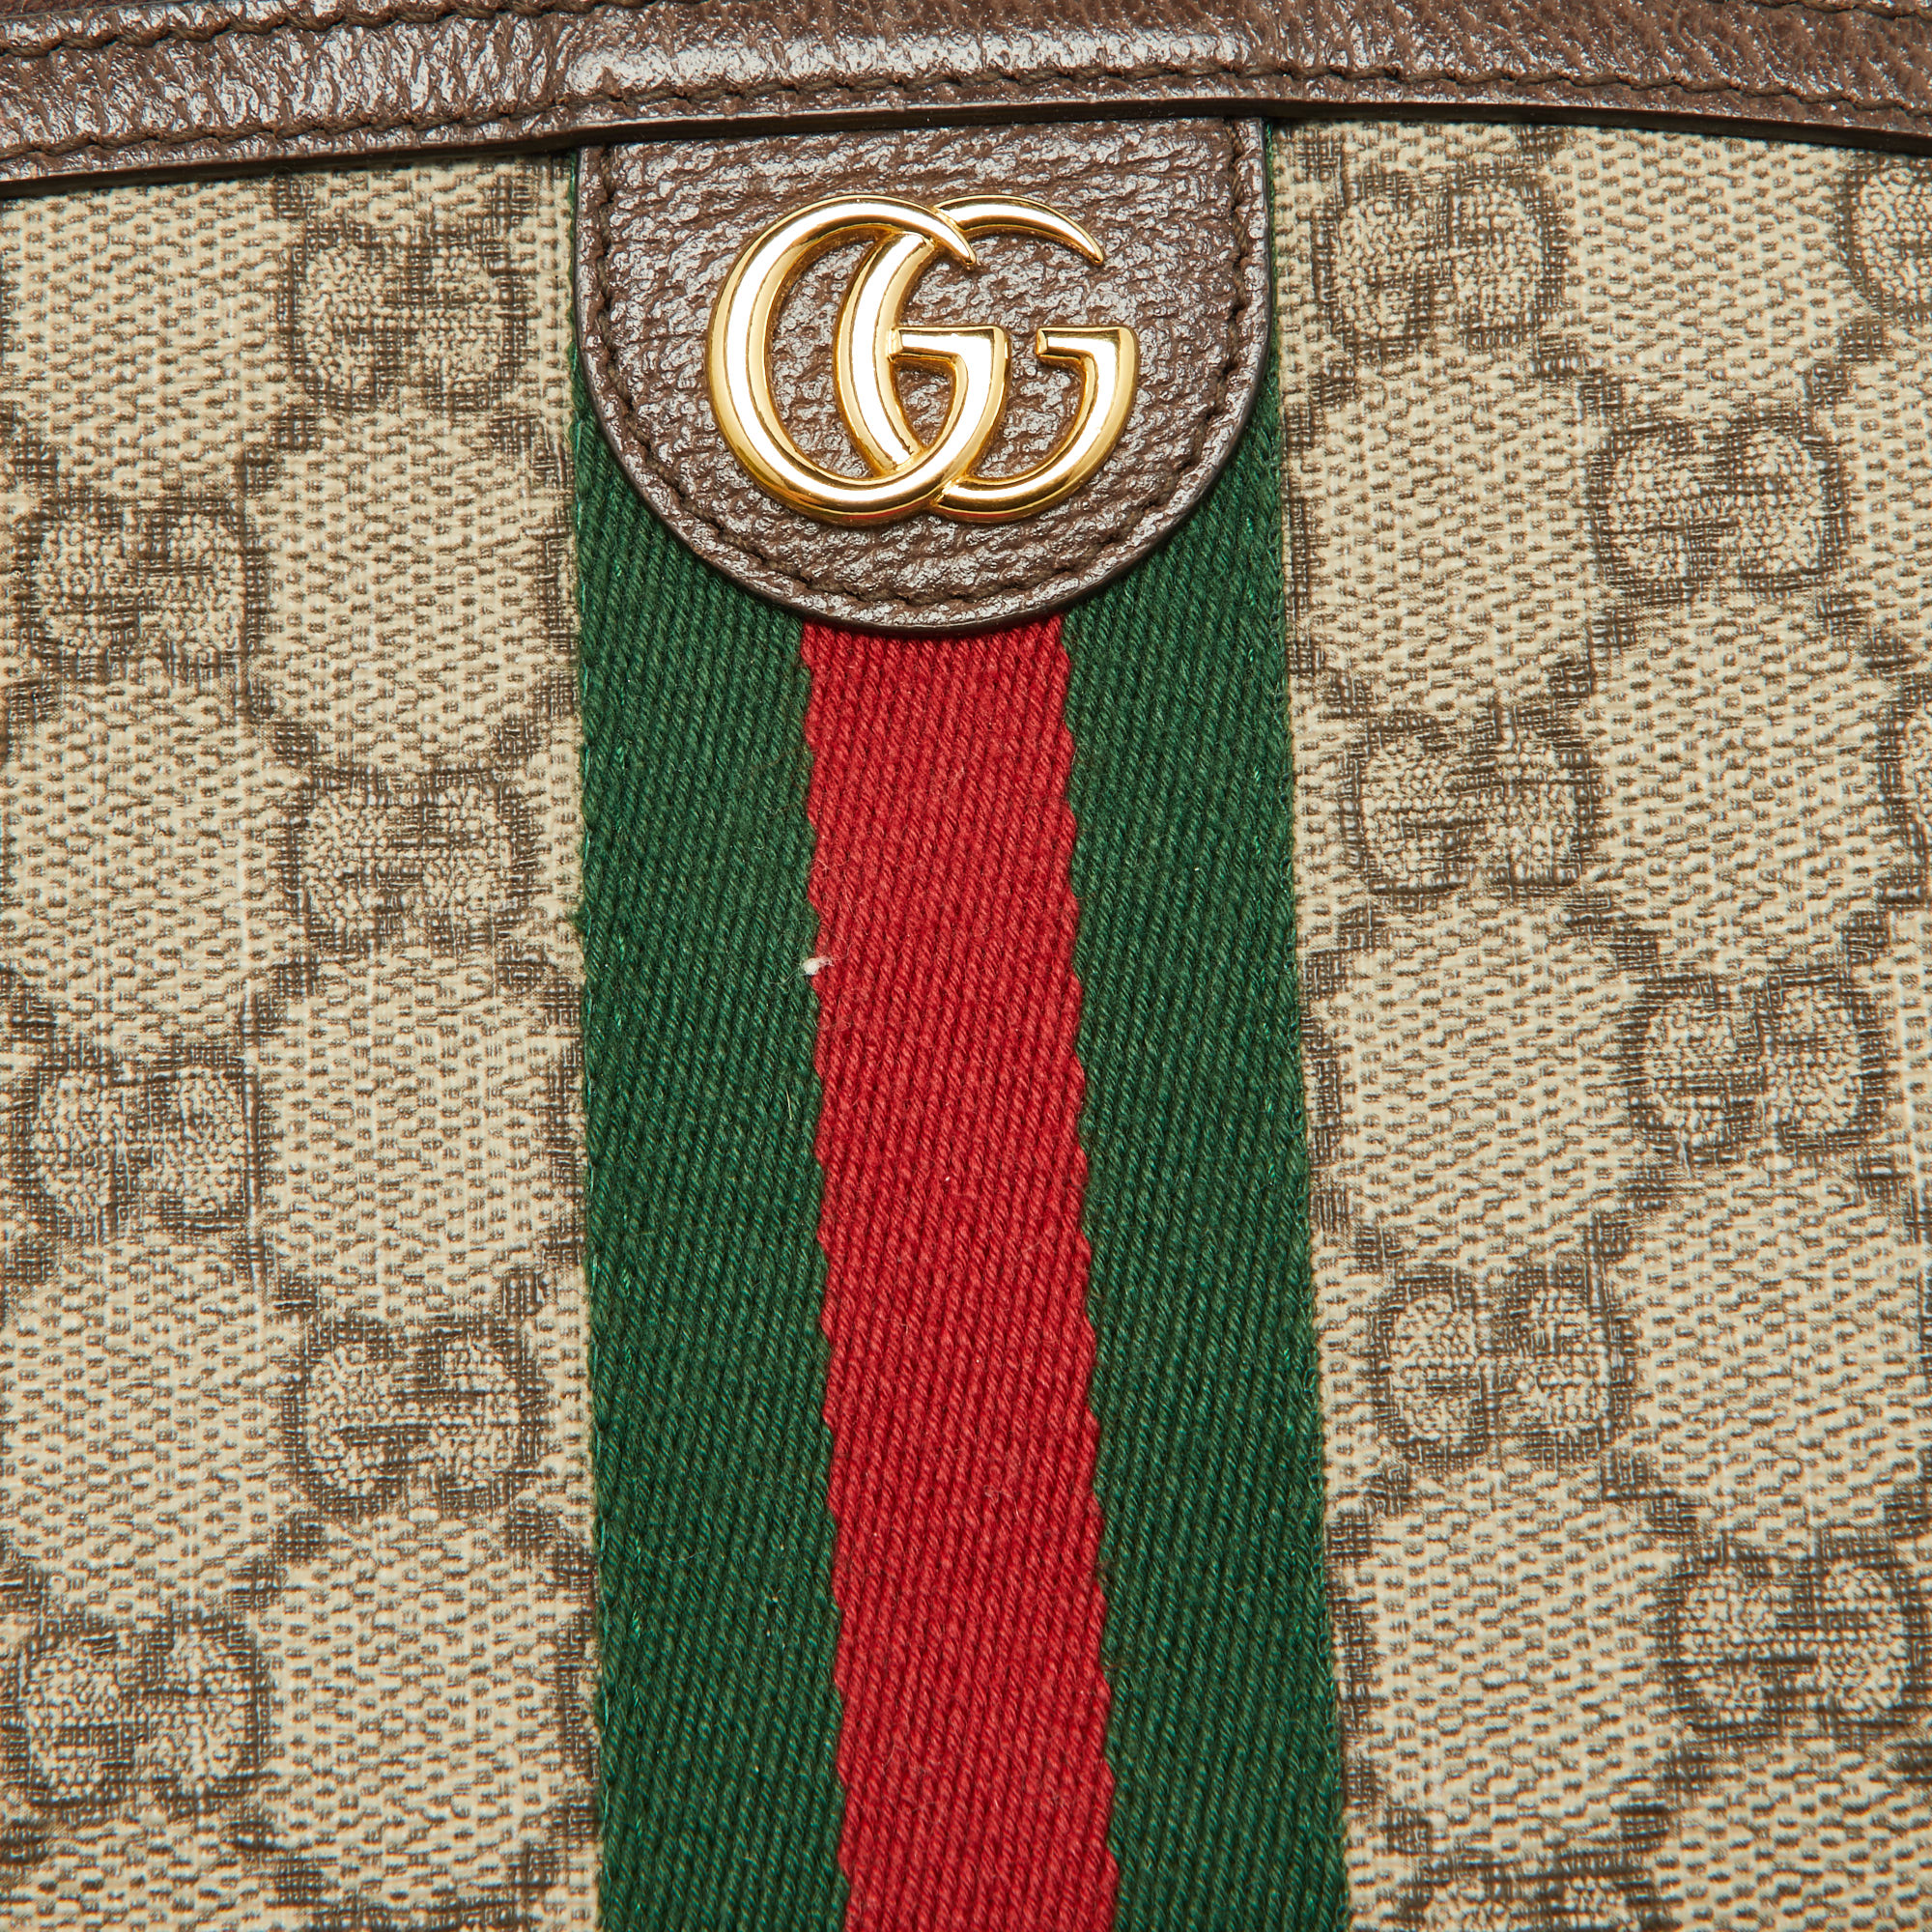 Gucci Beige GG Supreme Canvas And Leather Pouch